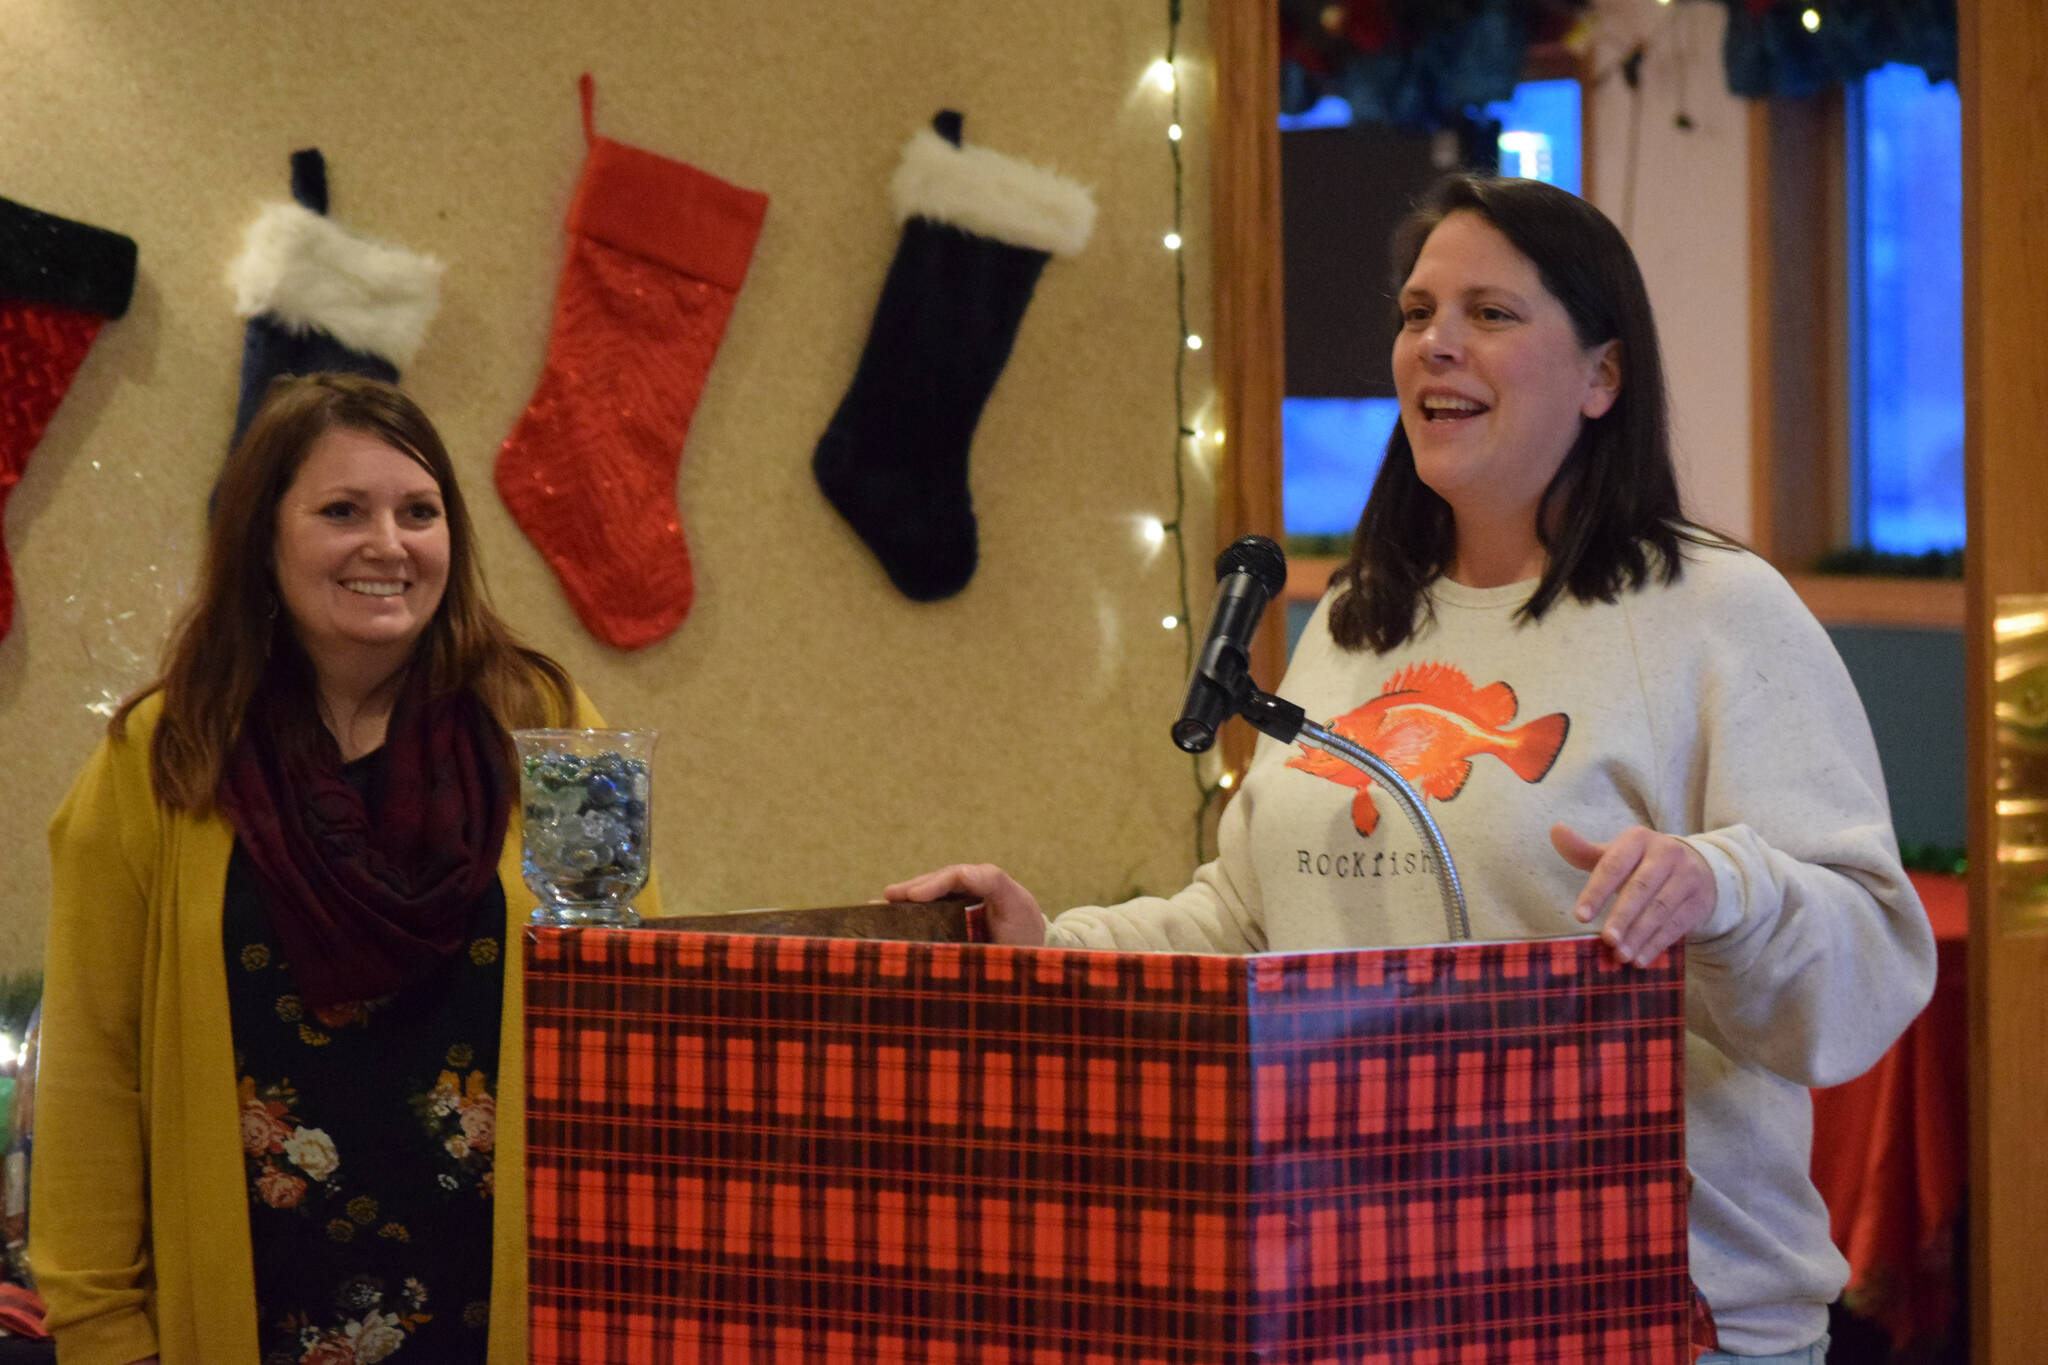 Jacquelynn Tomrdle, left, and Nicole Murphy, right, present on behalf of the Kenai Peninsula Borough School District Students in Transition program at the Kenai Peninsula Association of Realtors award ceremony at Kenai Catering on Thursday, Dec. 9, 2021. (Camille Botello/Peninsula Clarion)